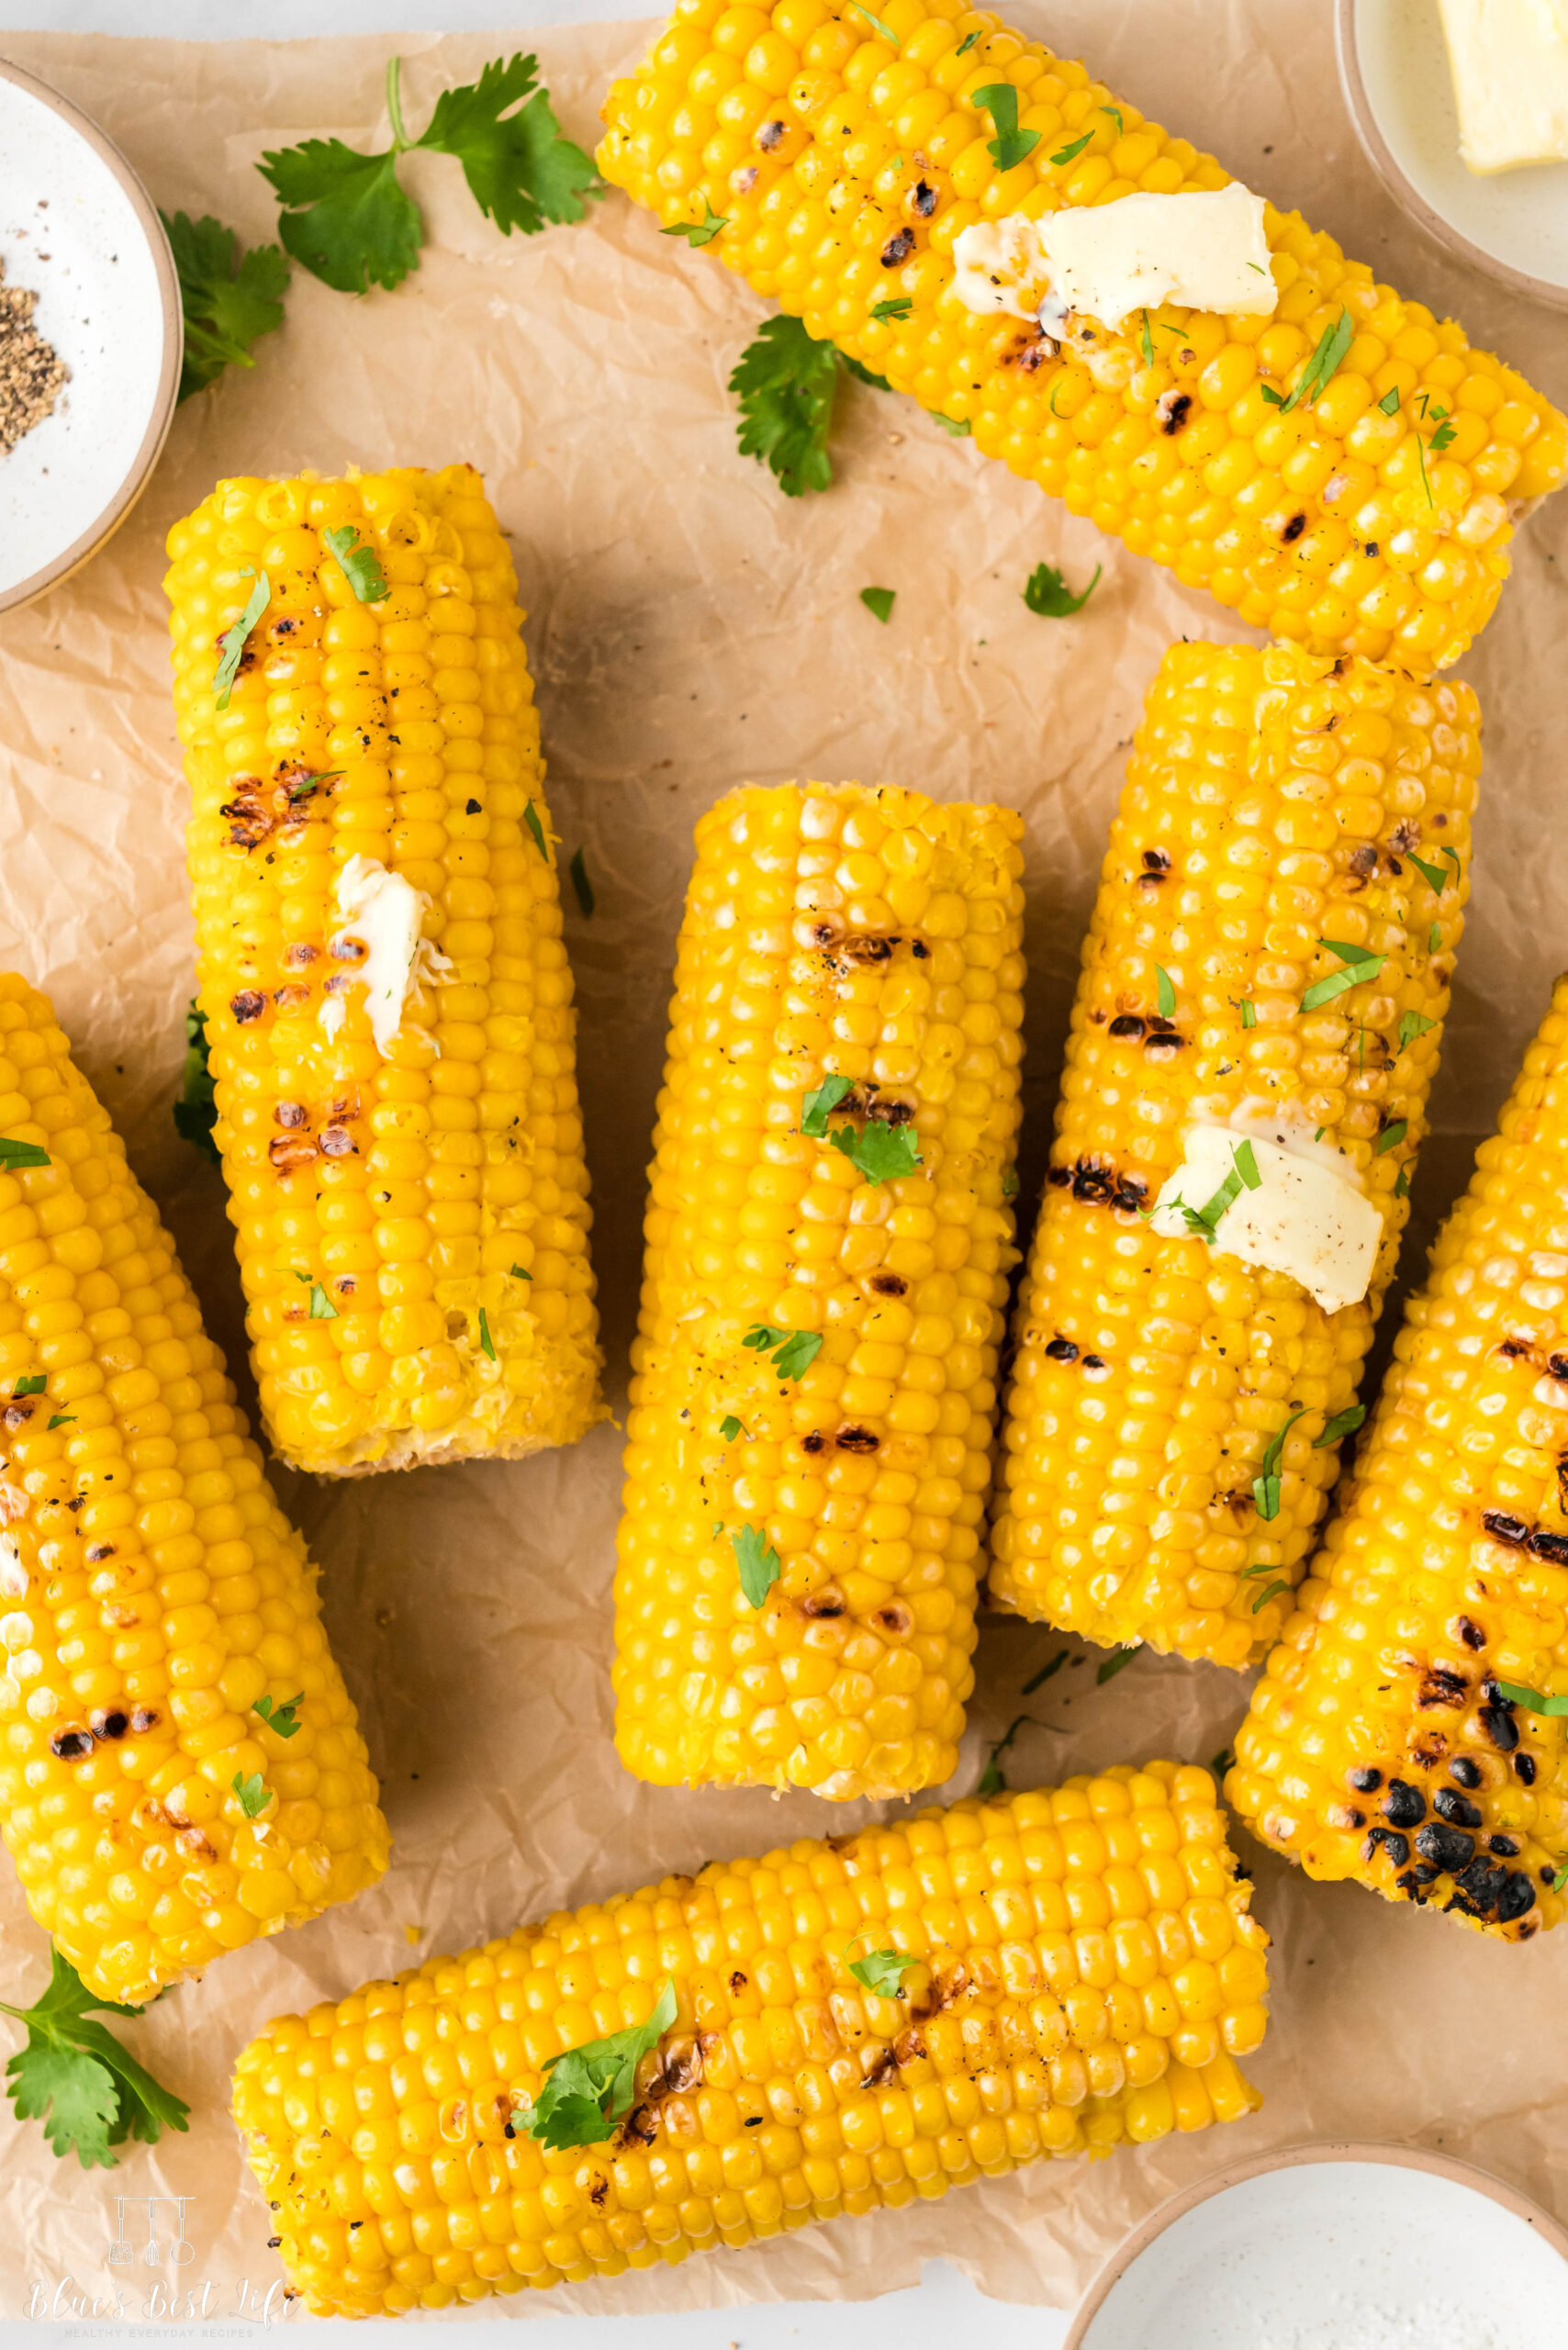 Grilled corn on the cob with butter melted overtop.